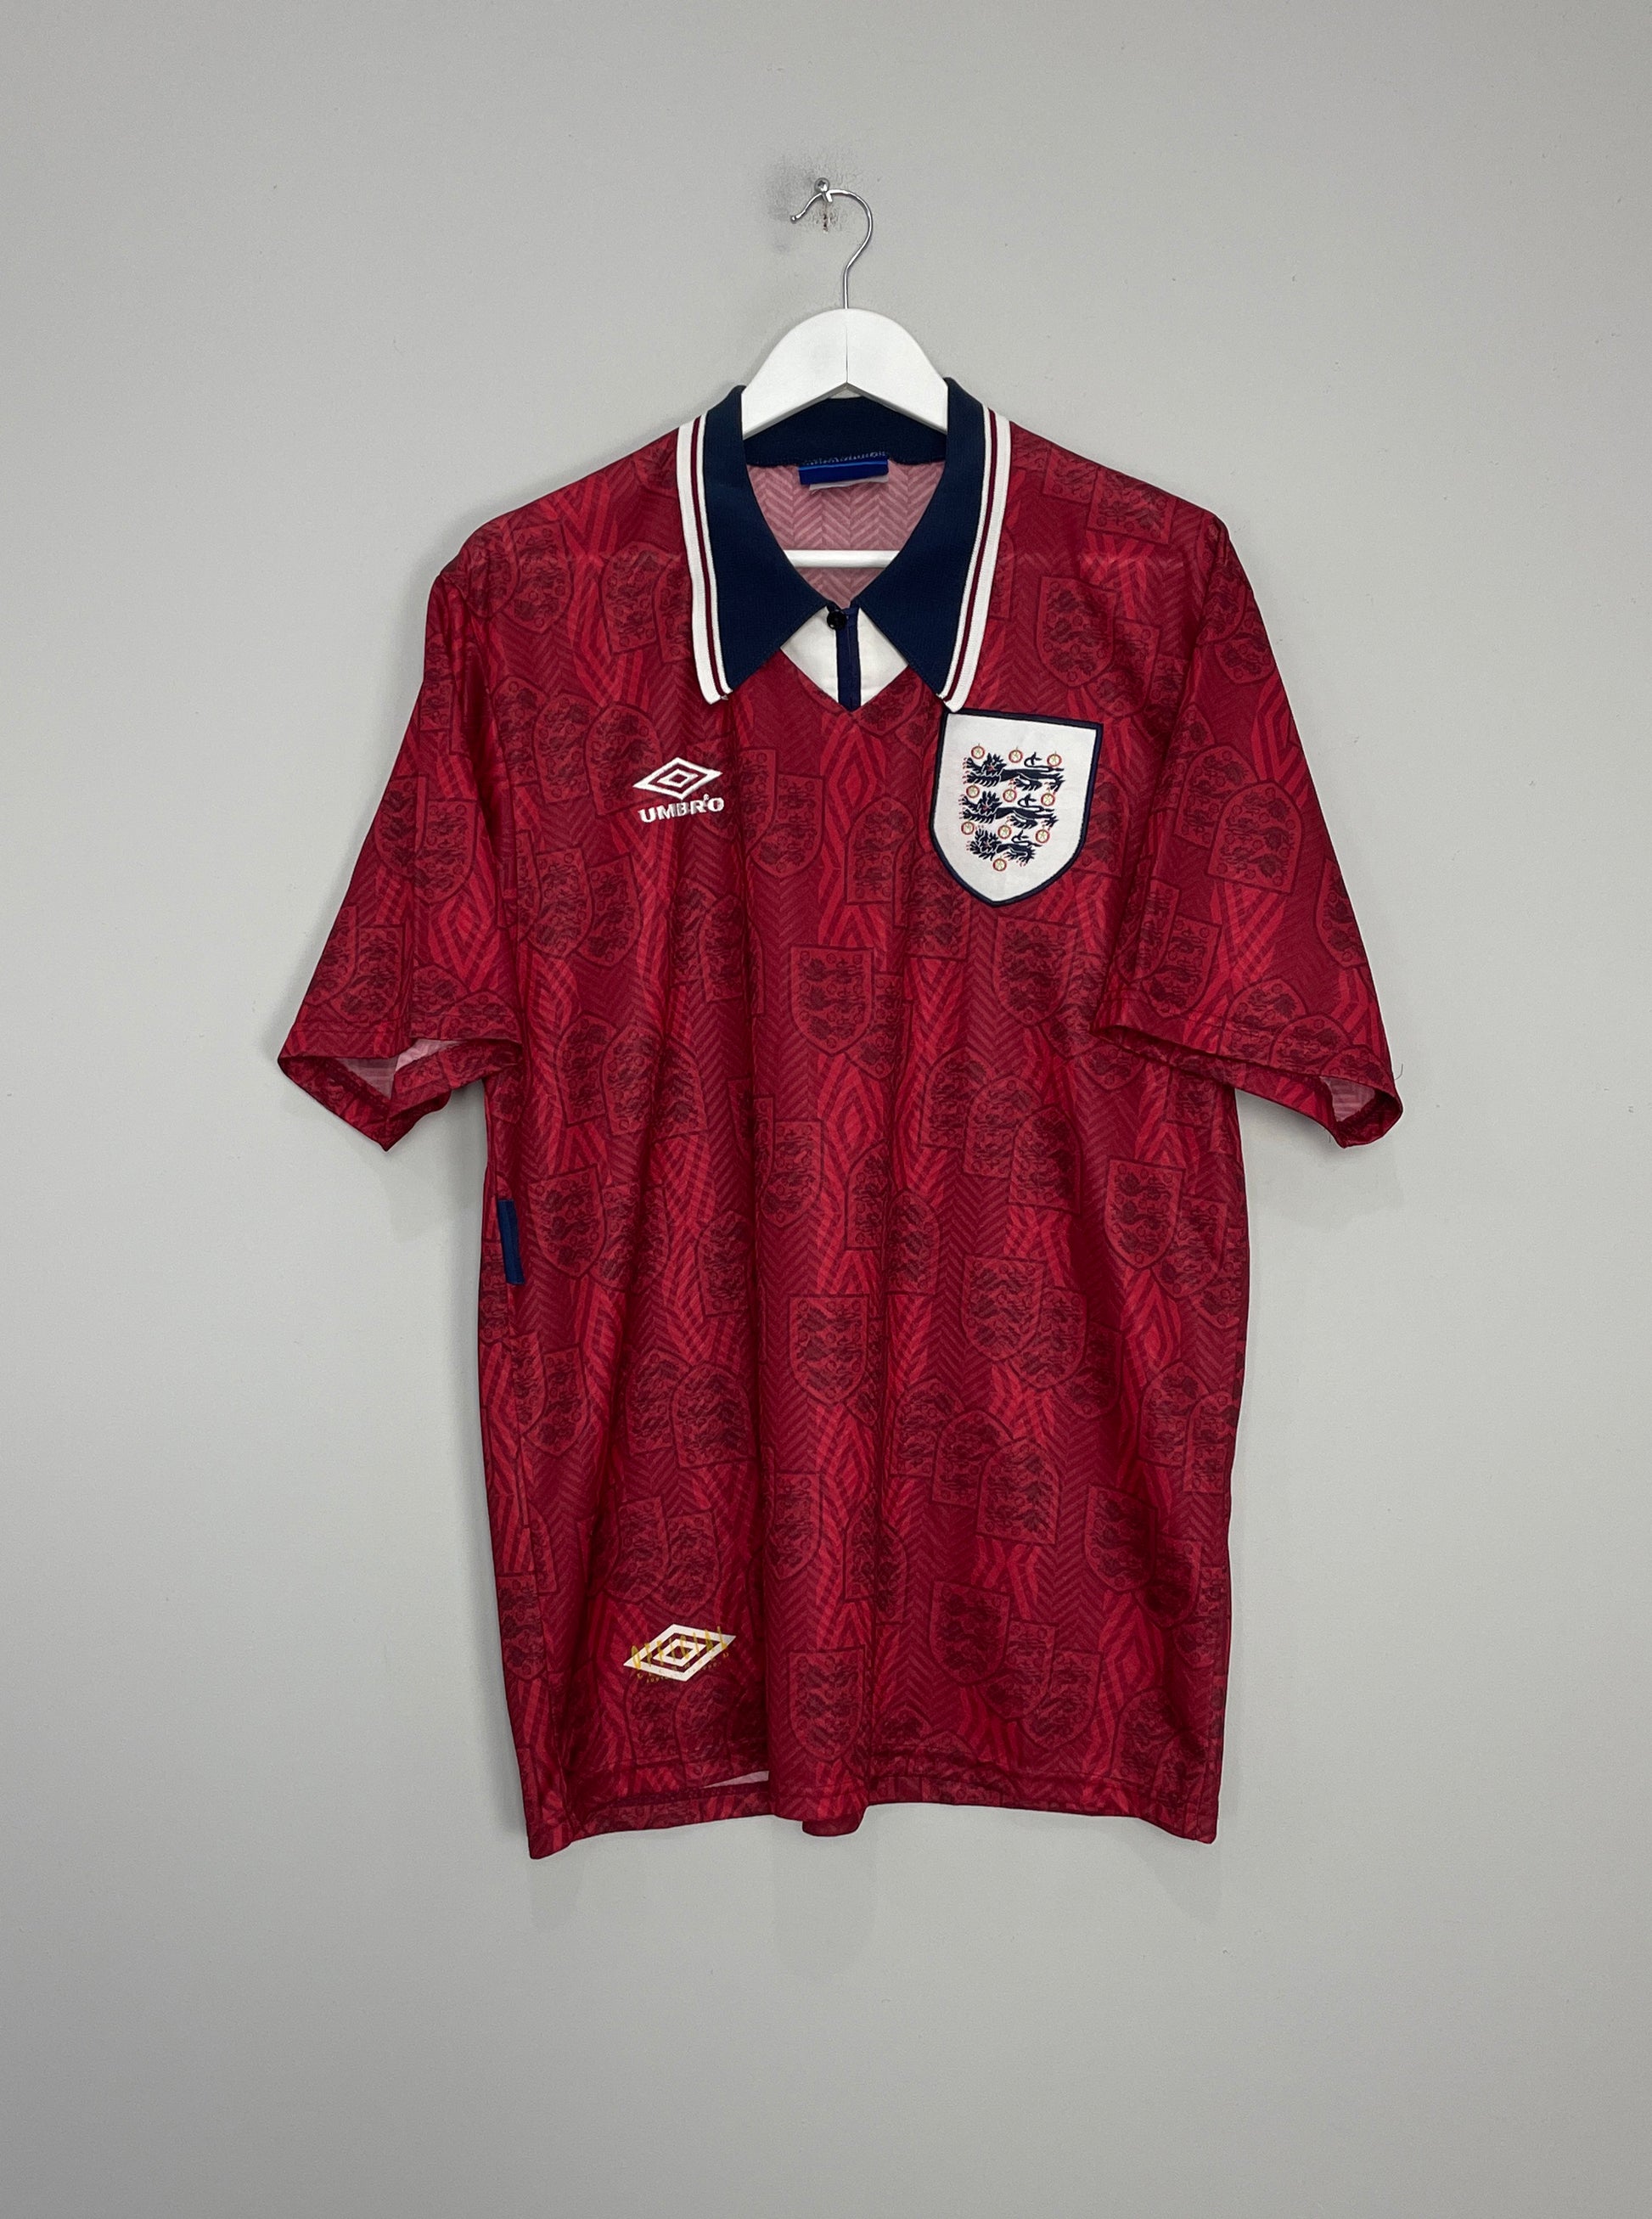 Image of the England shirt from the 1994/95 season